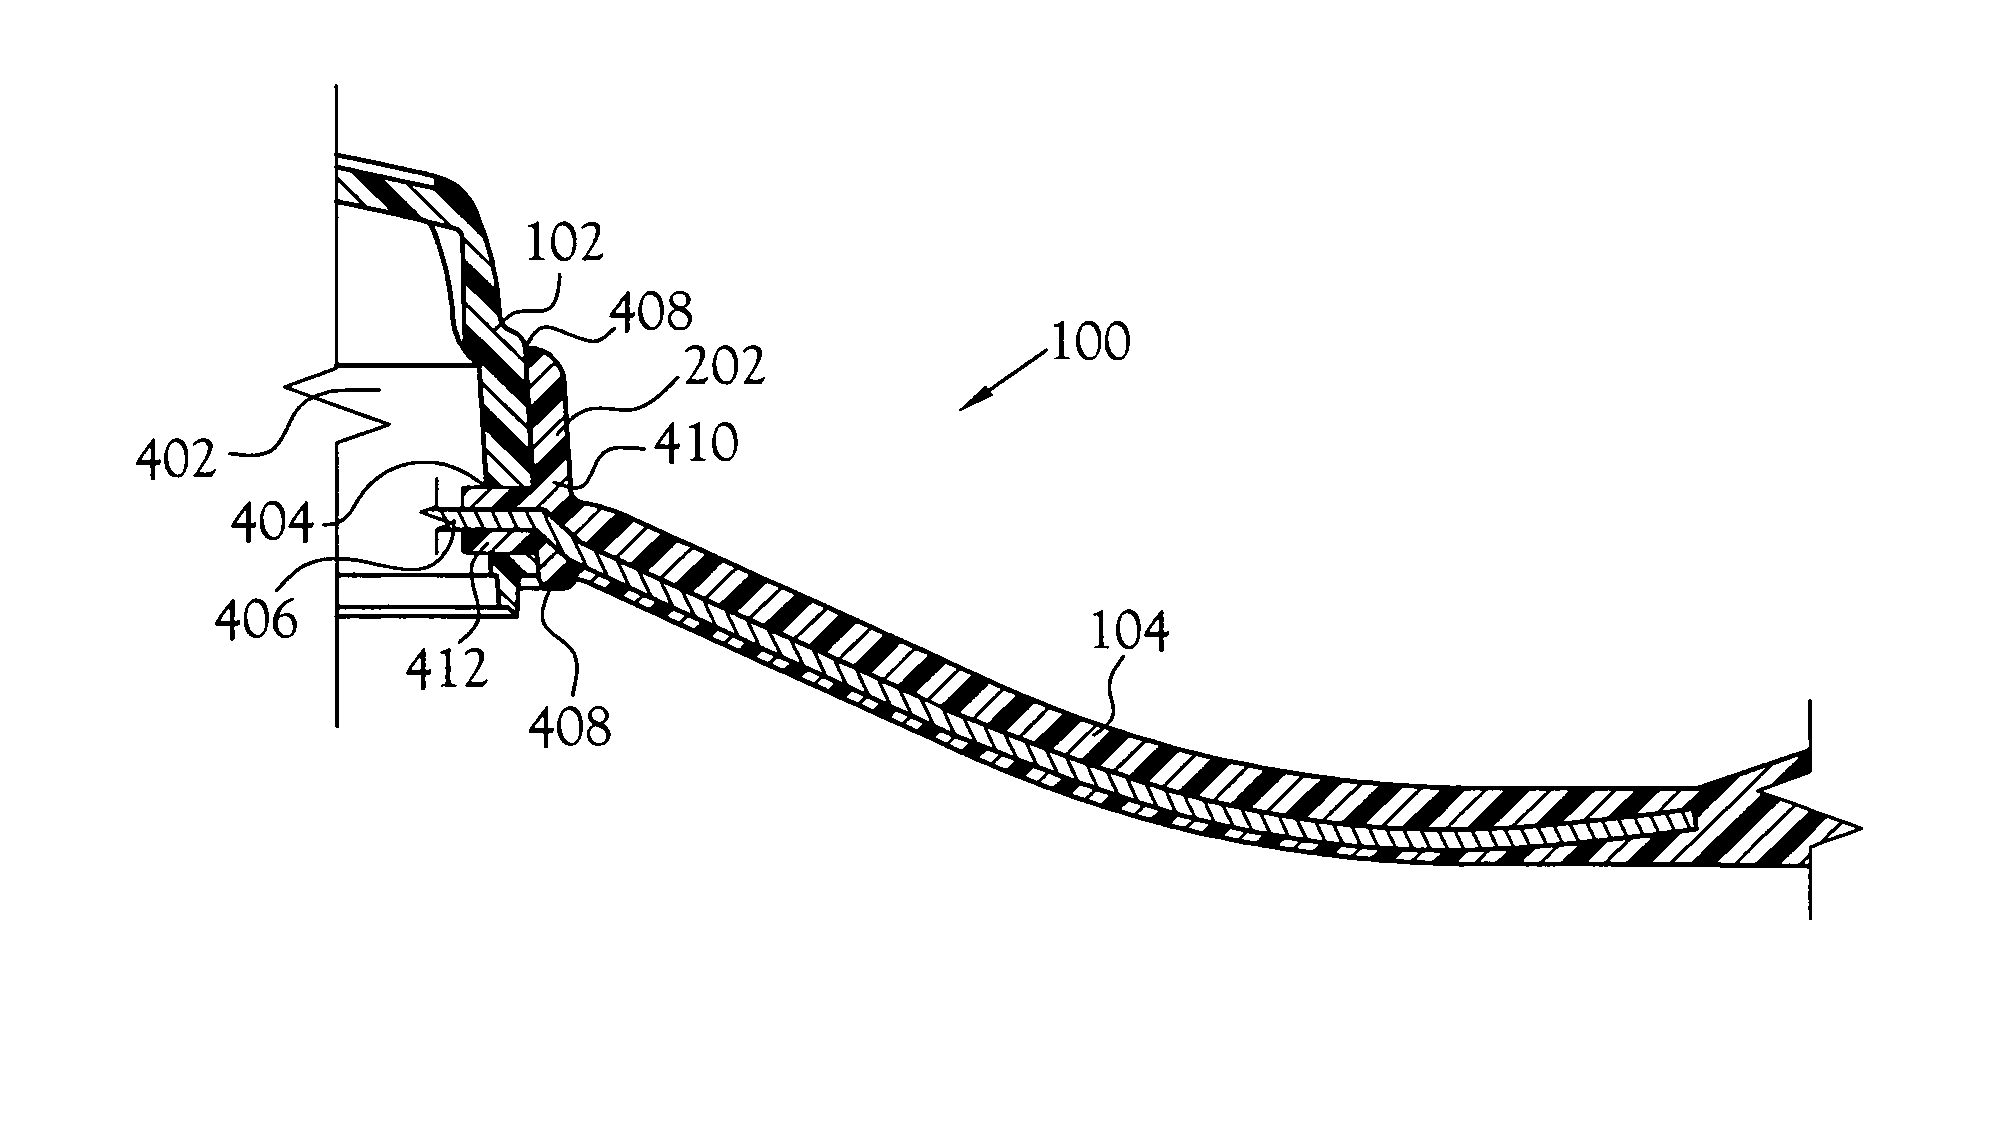 Antenna enclosed within an animal training apparatus